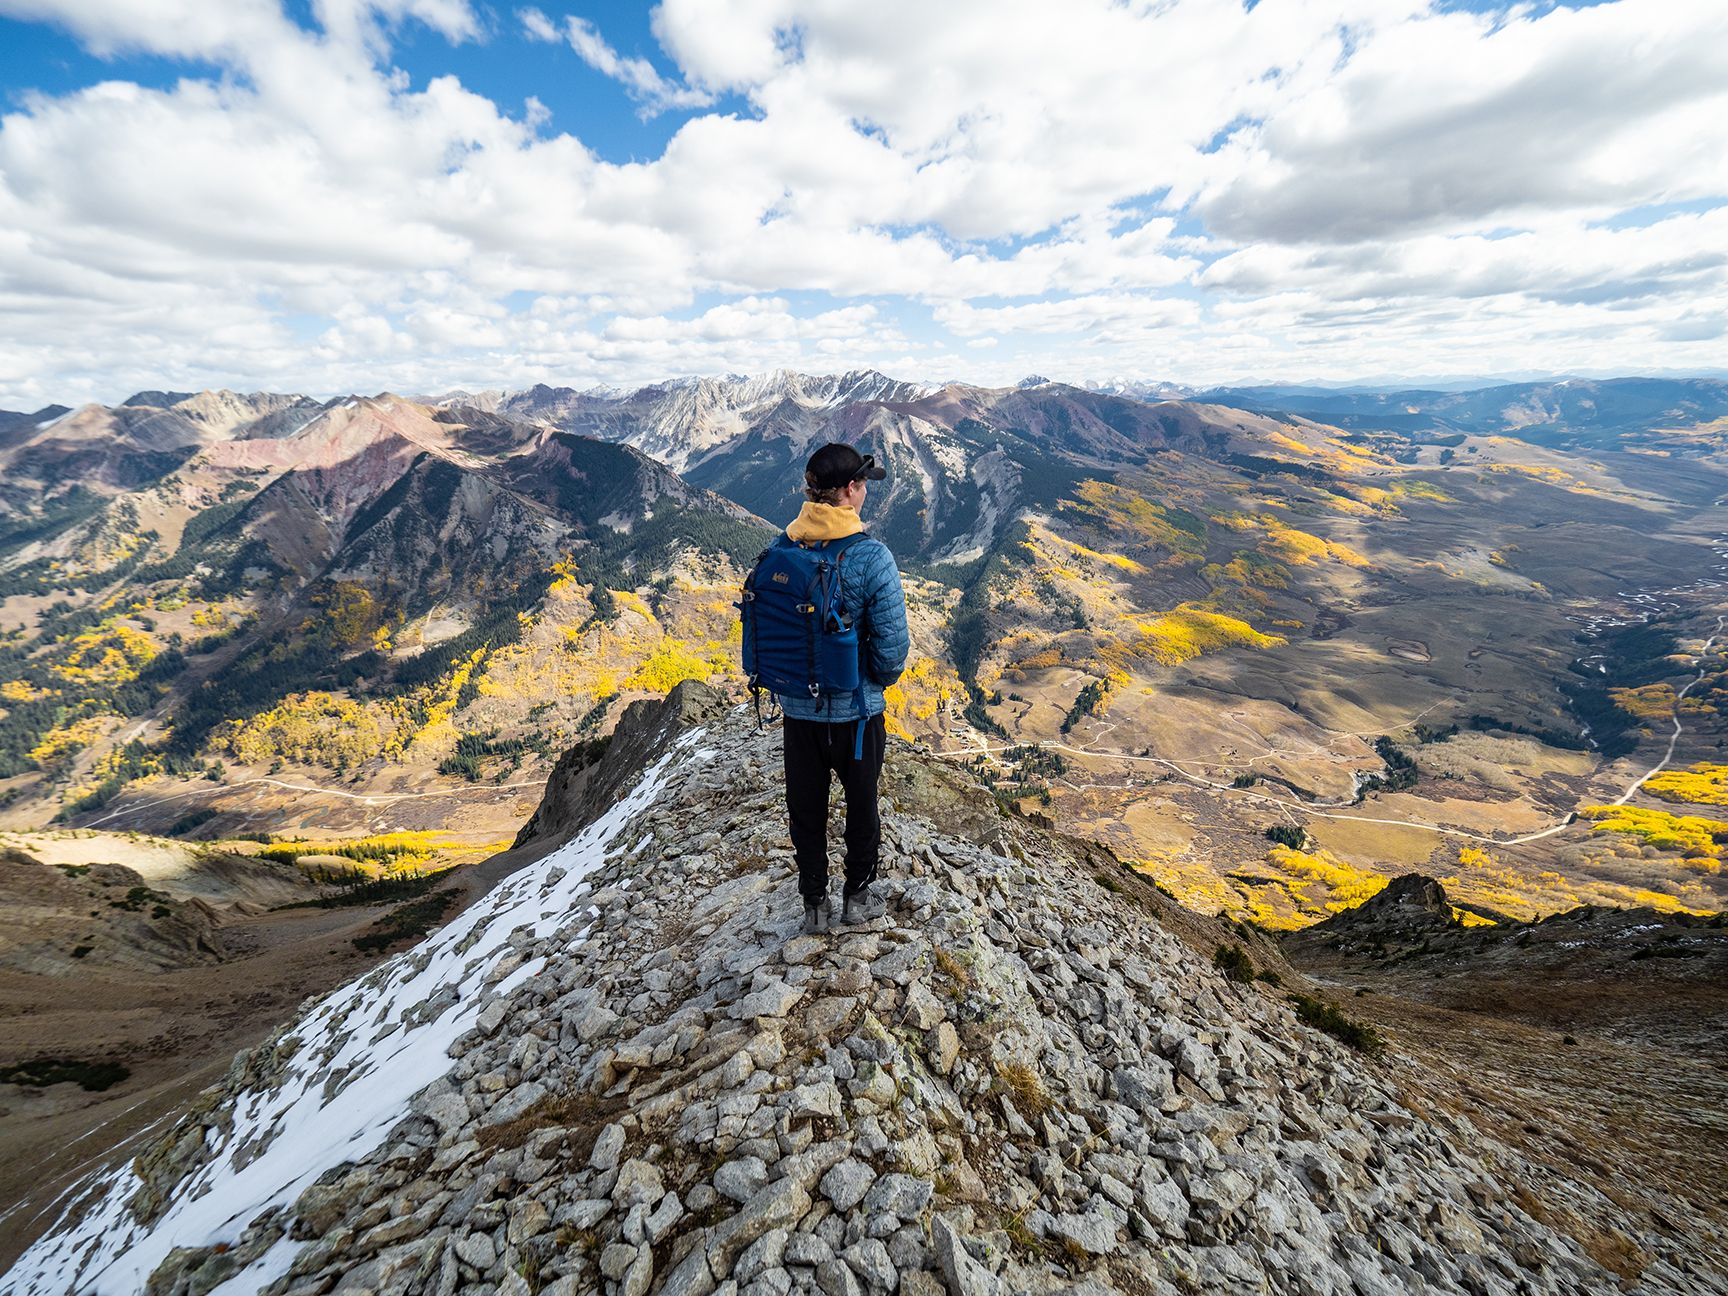 A man hikes on a rocky ridge overlooking a mountain valley with yellow aspen leaves.